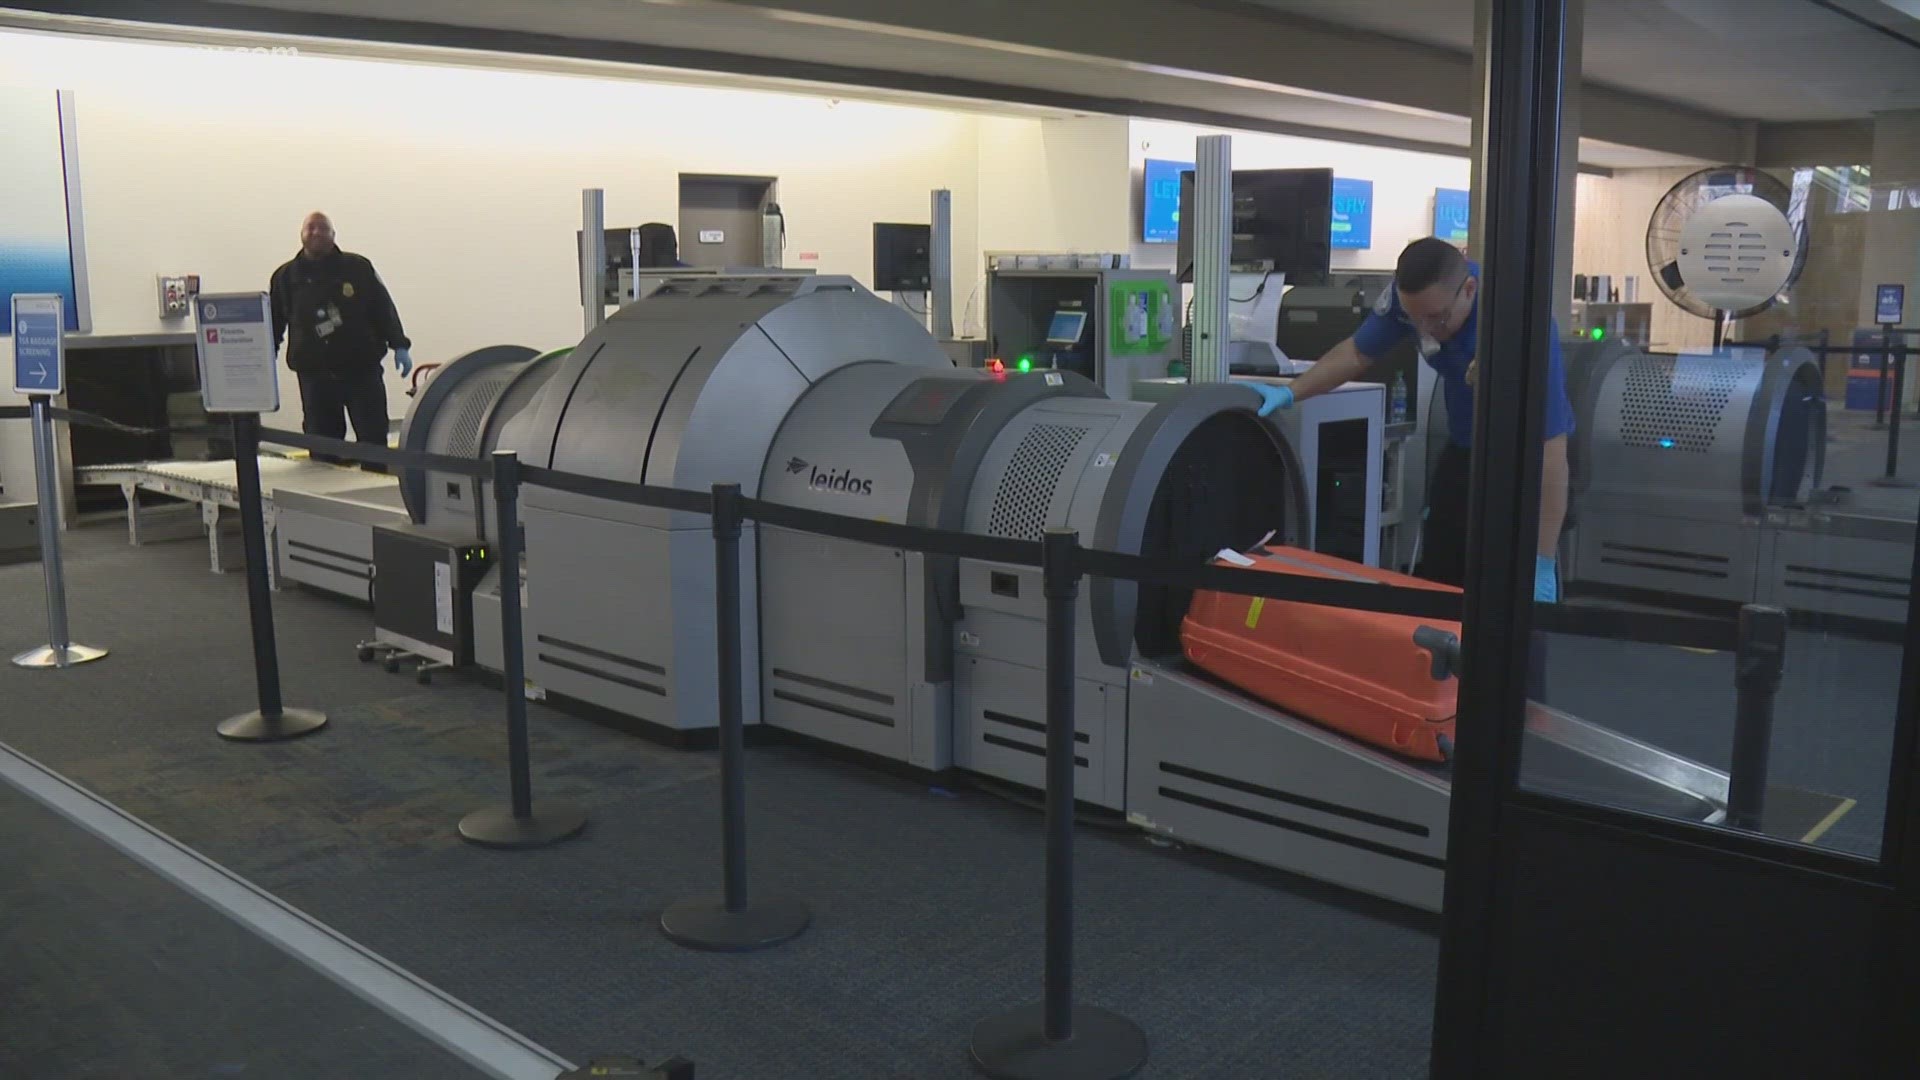 Tests were run at airport security checkpoints in response to concerns about radiation levels.